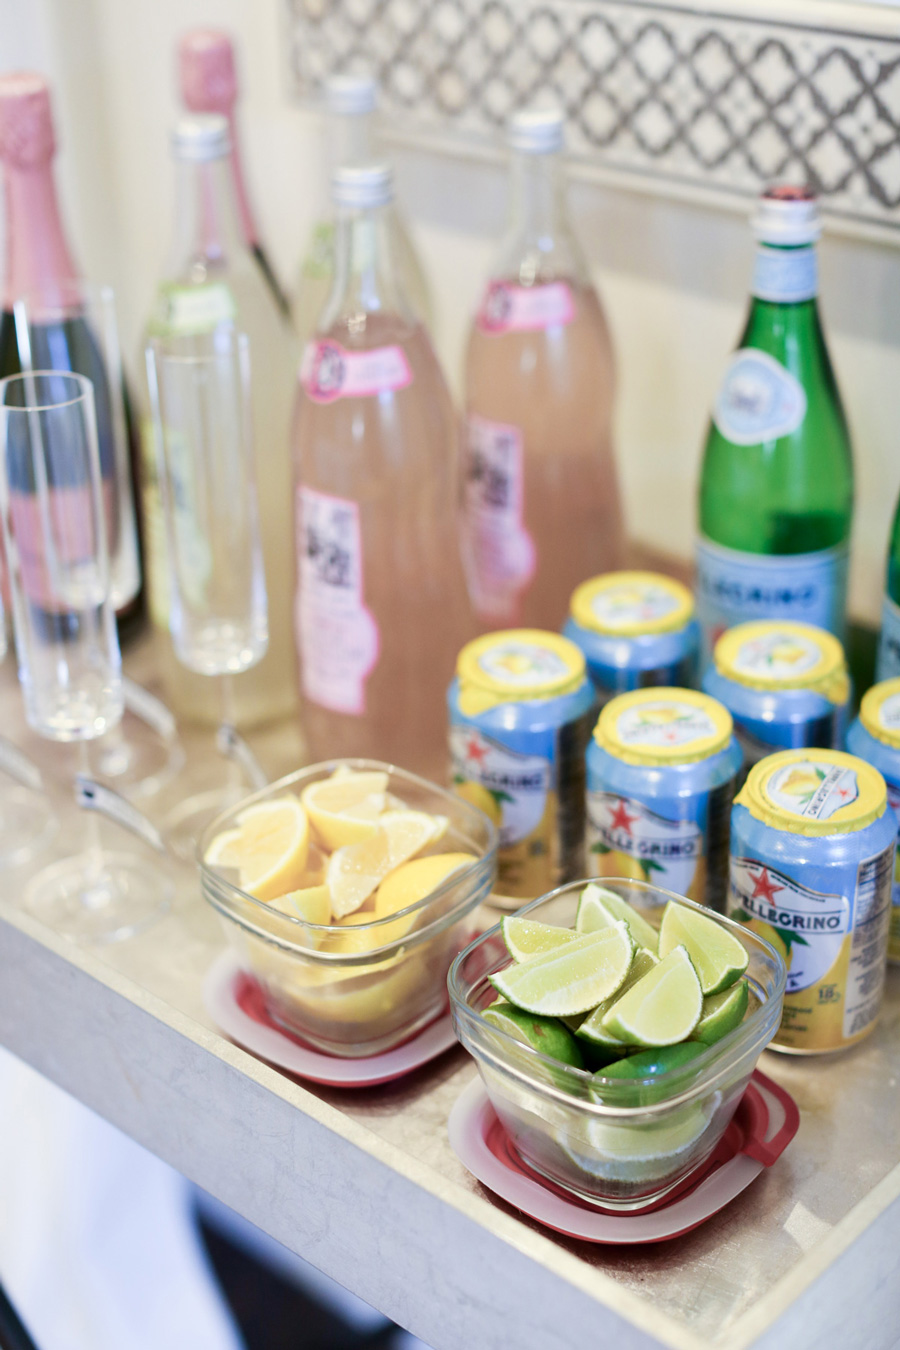 If you're looking for great housewarming party ideas, check out these 7 tips for throwing an awesome housewarming party!